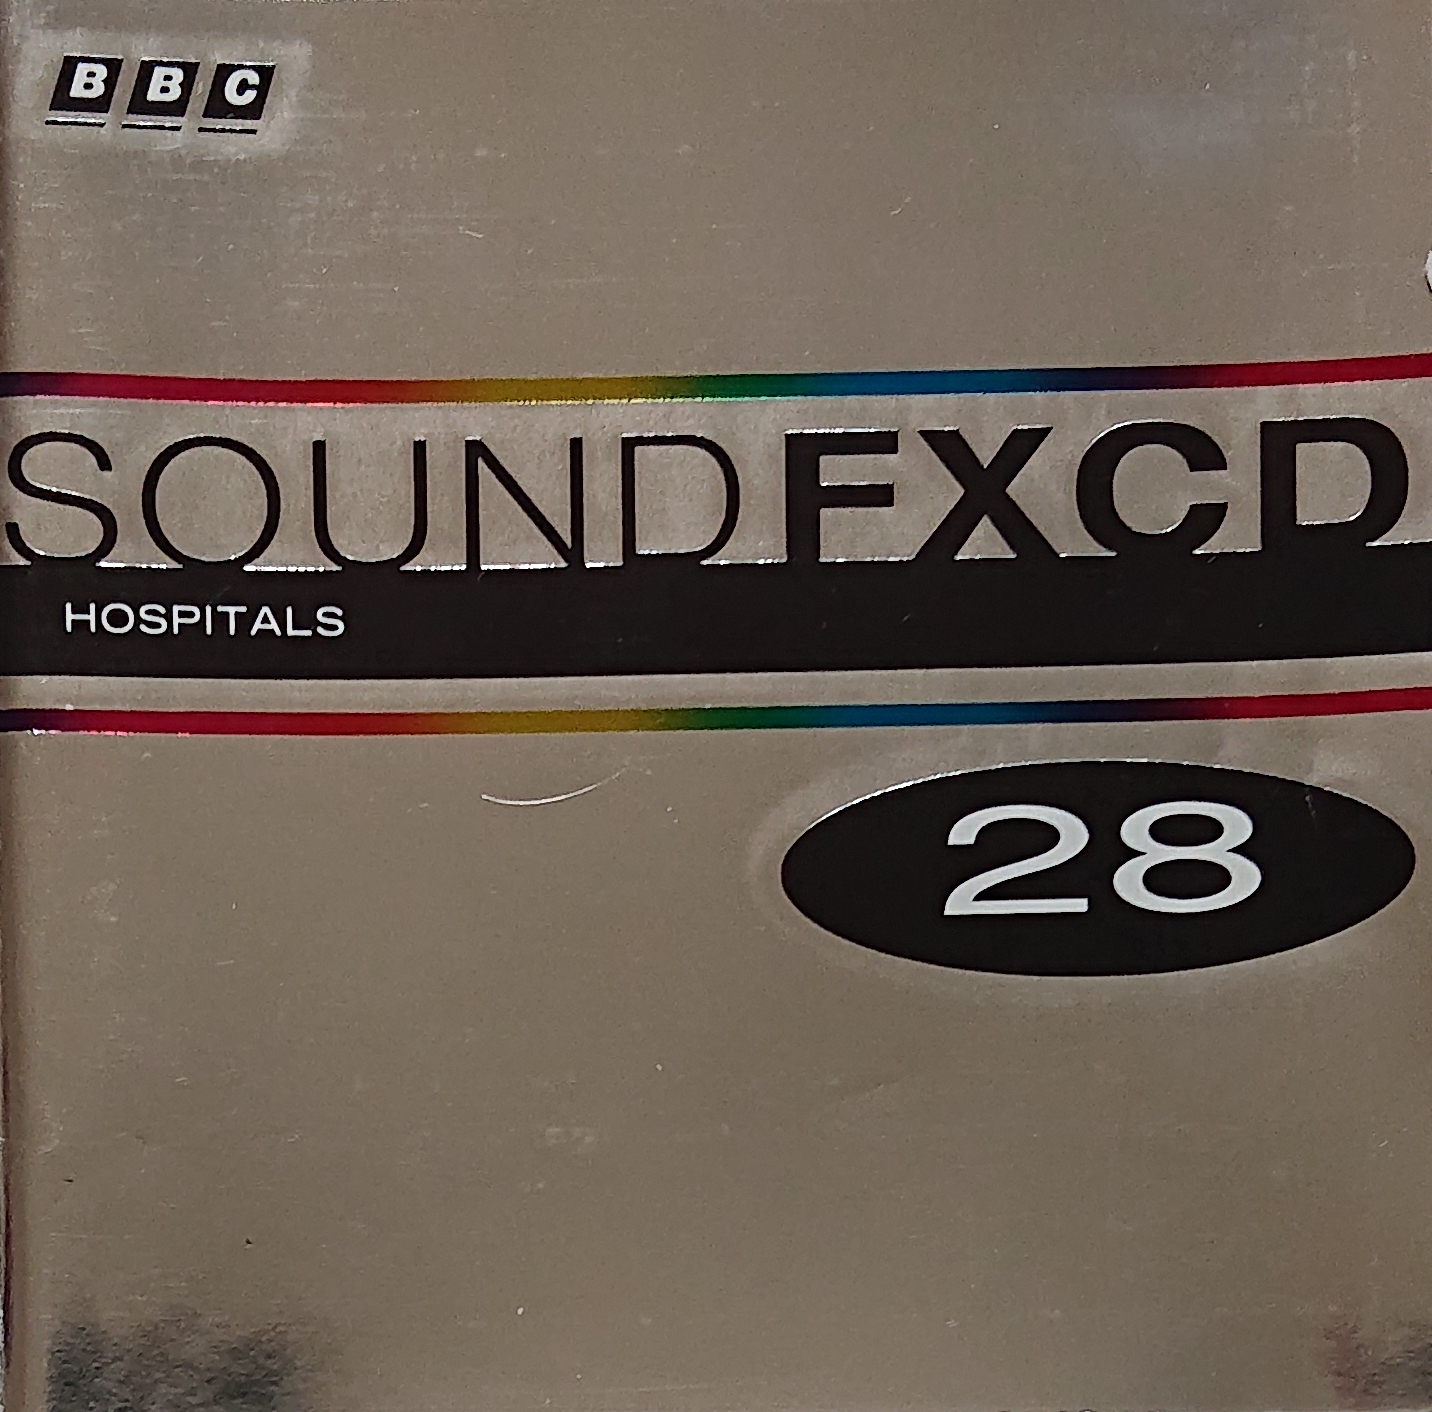 Picture of BBCCD SFX028 Hospitals by artist Various from the BBC records and Tapes library